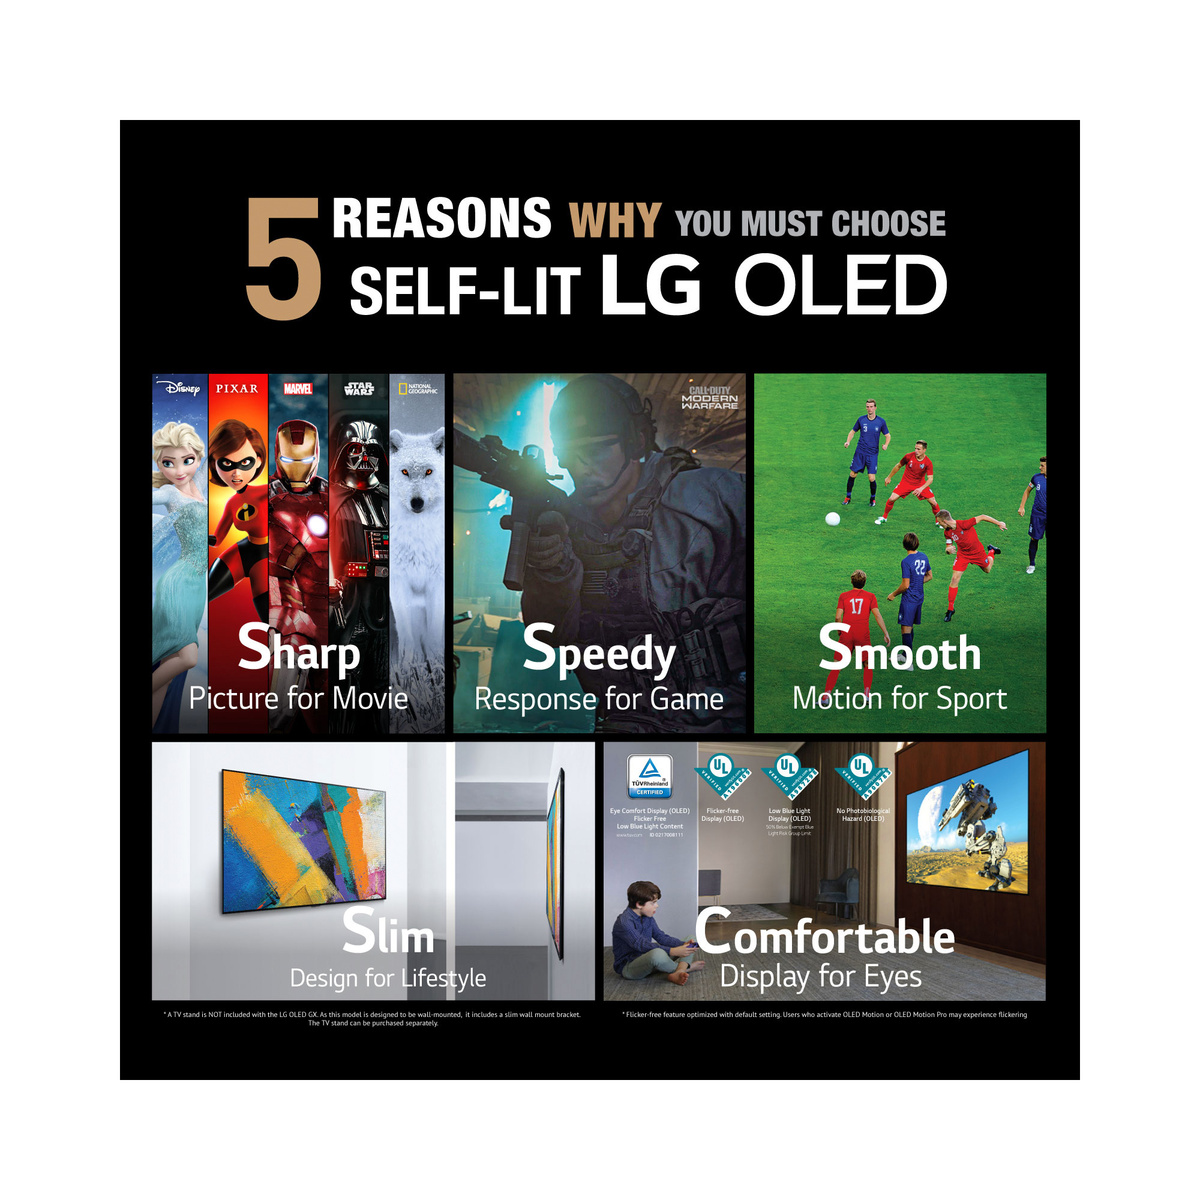 LG OLED 4K Smart TV 65 Inch G1 Series Gallery Design, New 2021 4K Cinema HDR webOS Smart with ThinQ AI Pixel Dimming